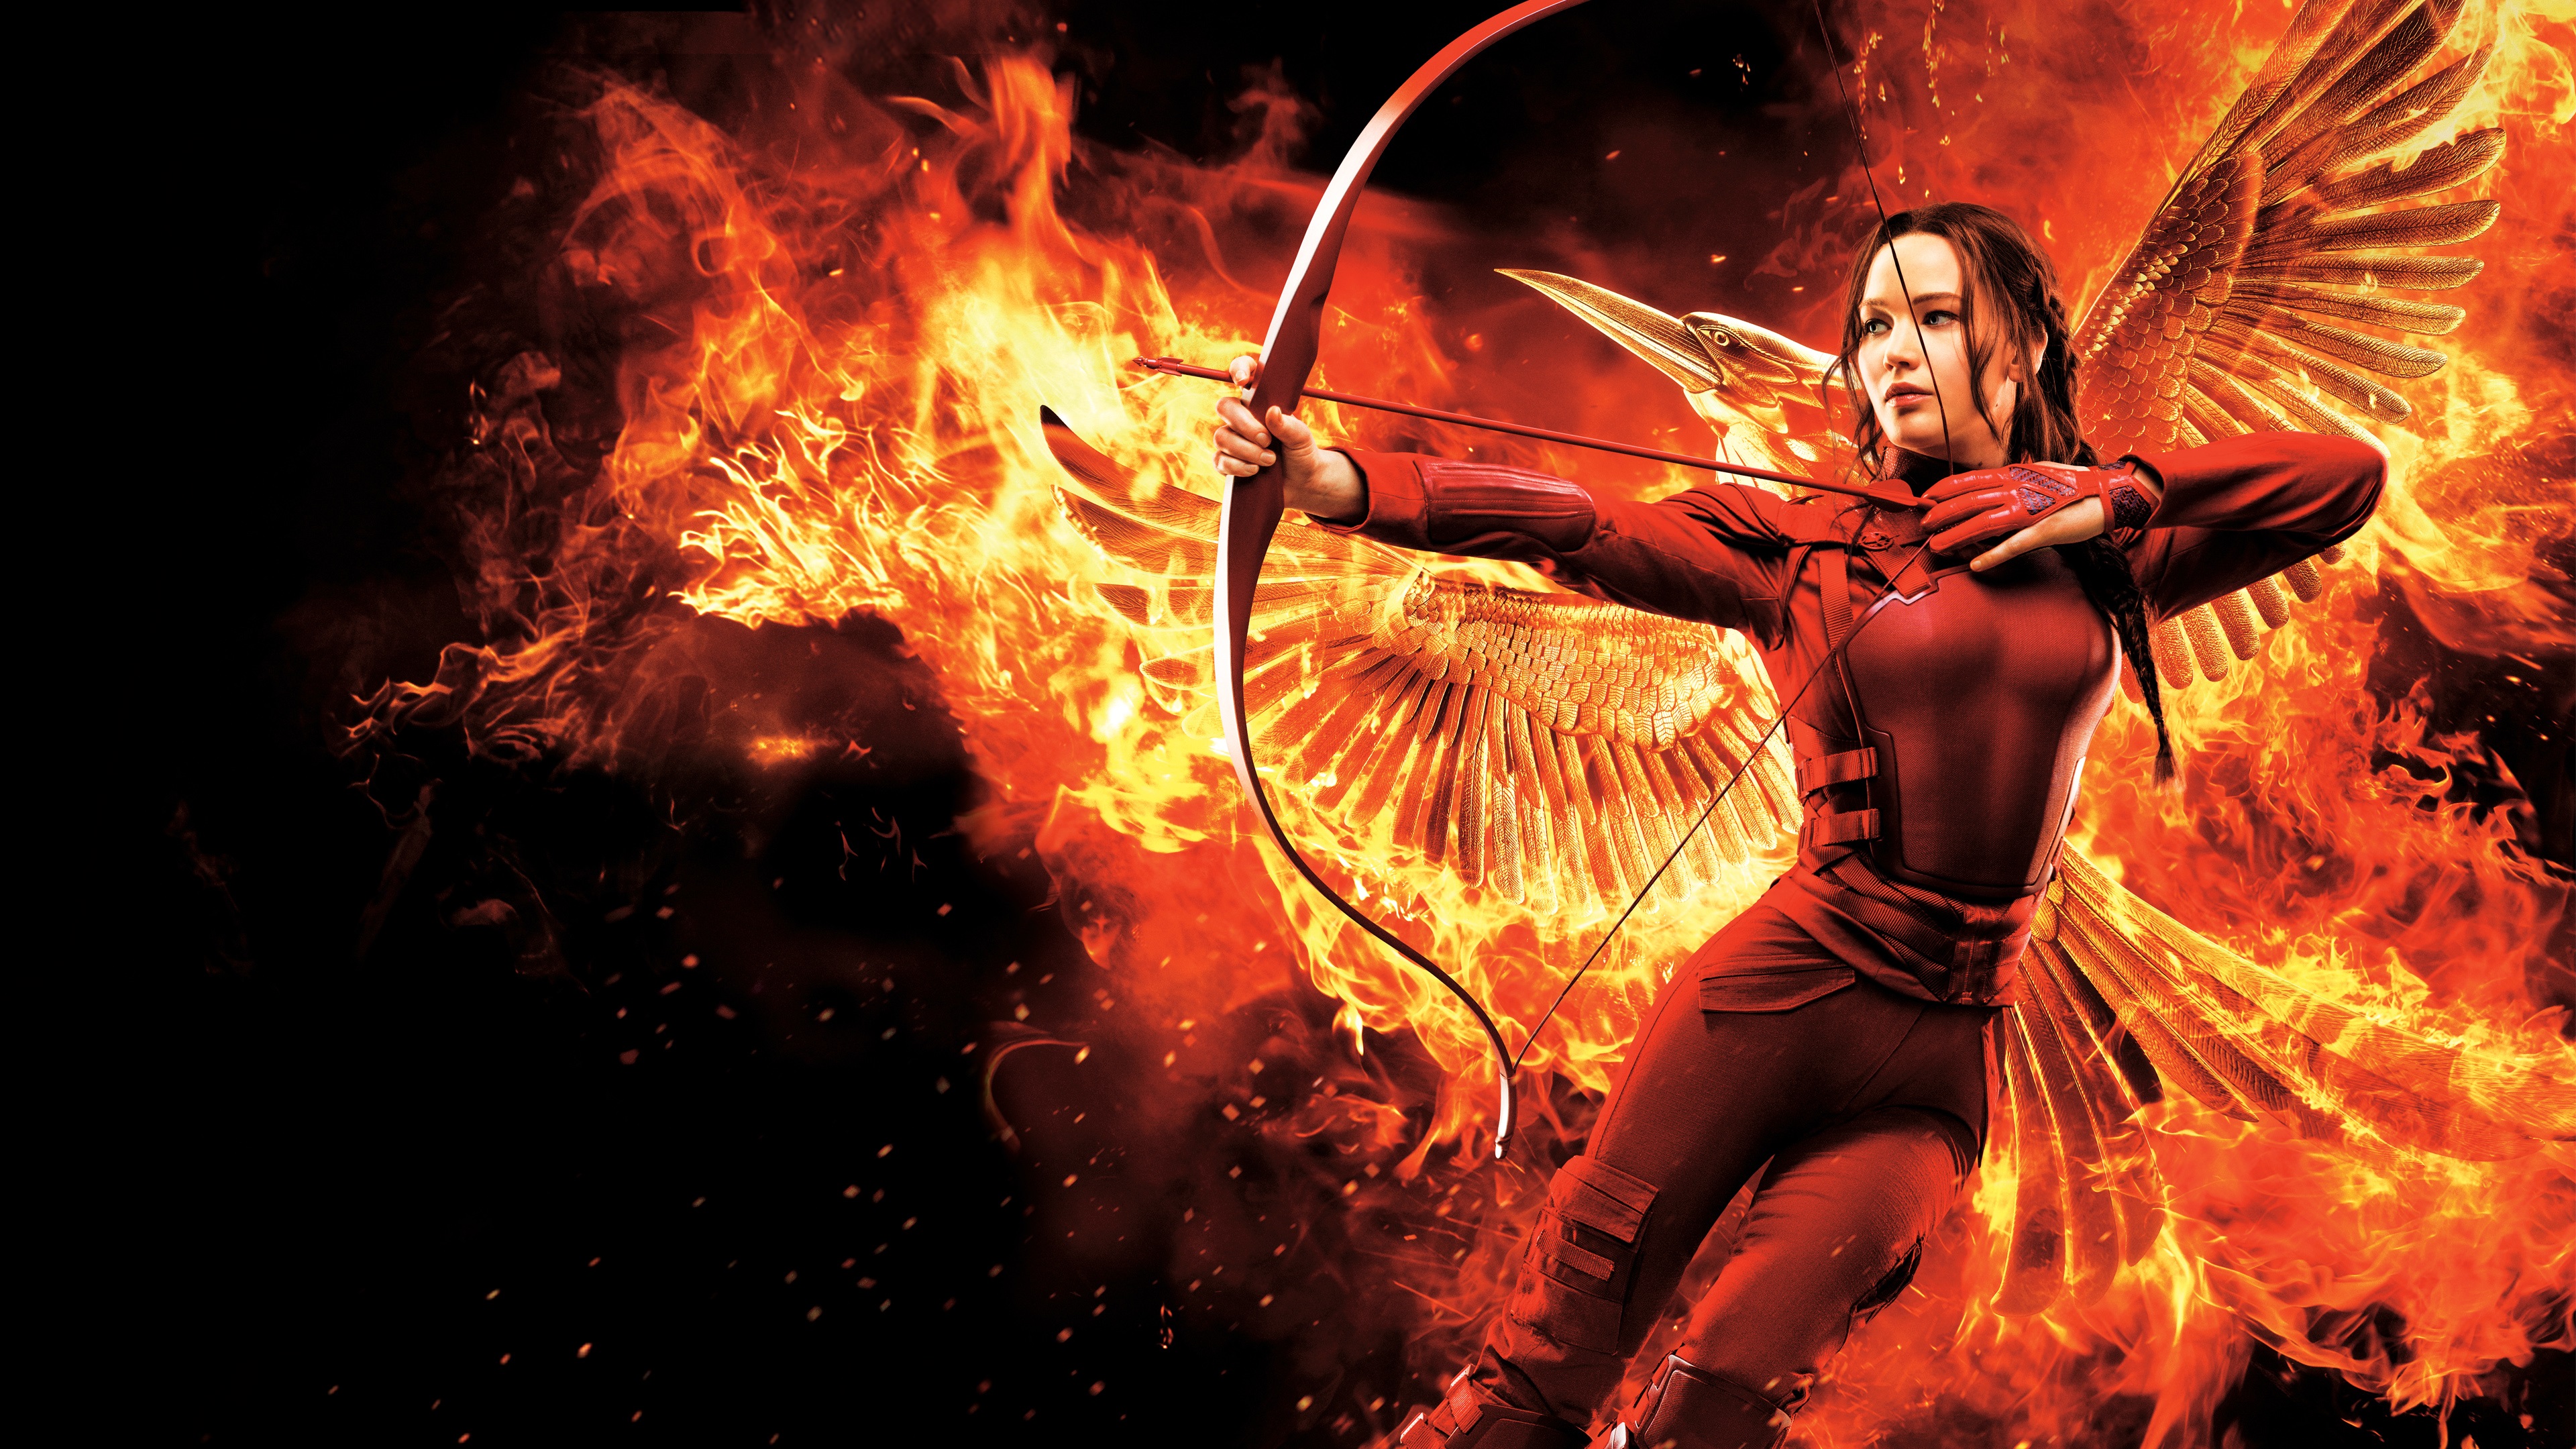 THE HUNGER GAMES: MOCKINGJAY – PART 2 Makes It Across the Finish Line With a Few Stumbles